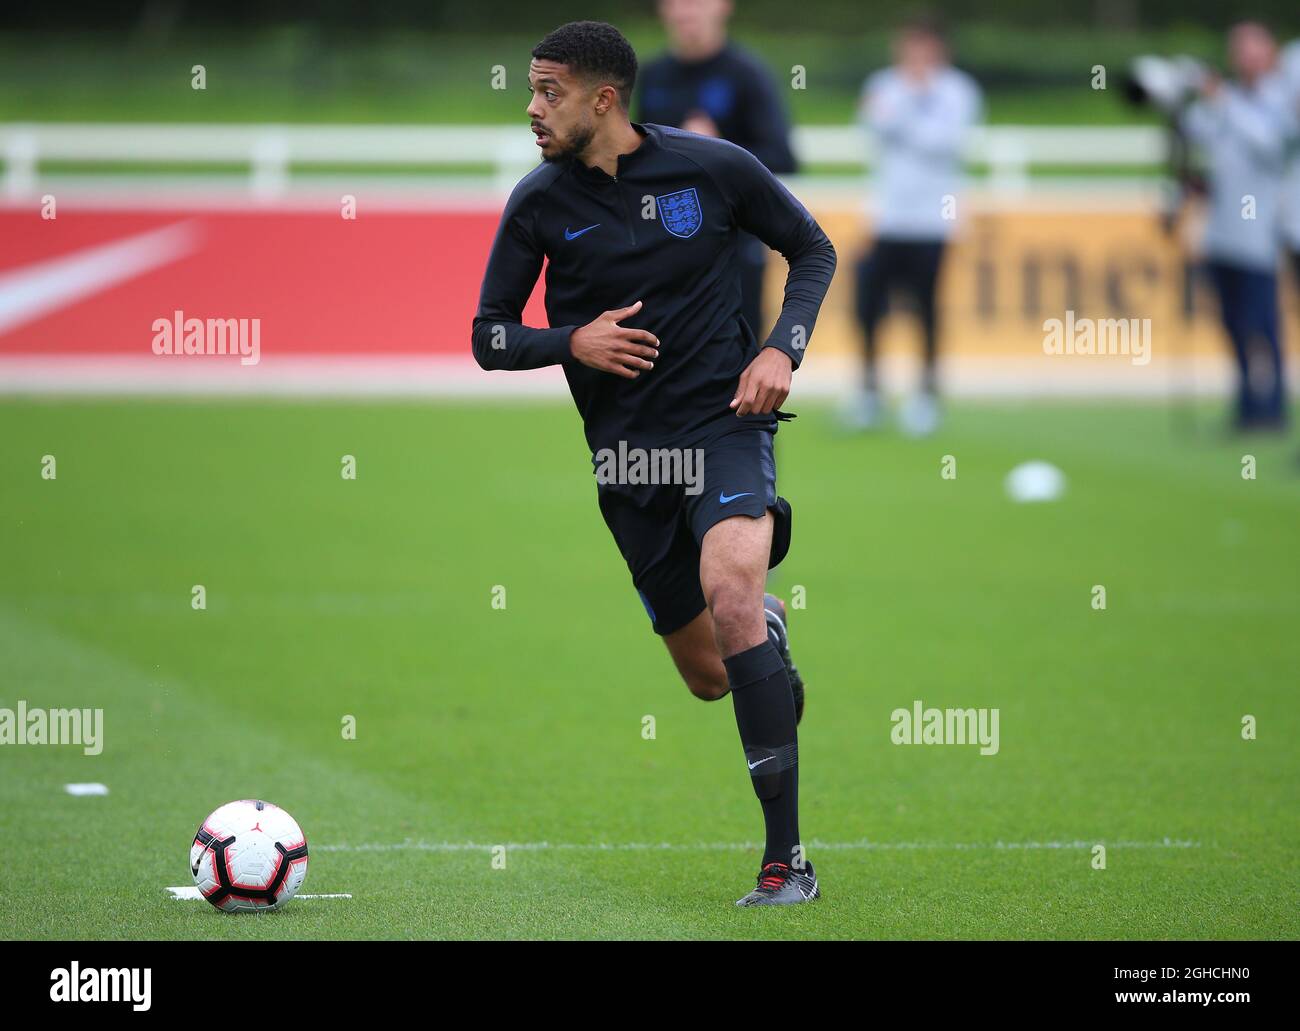 Jake Clarke-Salter of England during the England U21 squad training session at St George's Park, Burton on Trent. Picture date 4th September 2018. Picture credit should read: Nigel French/Sportimage via PA Images Stock Photo